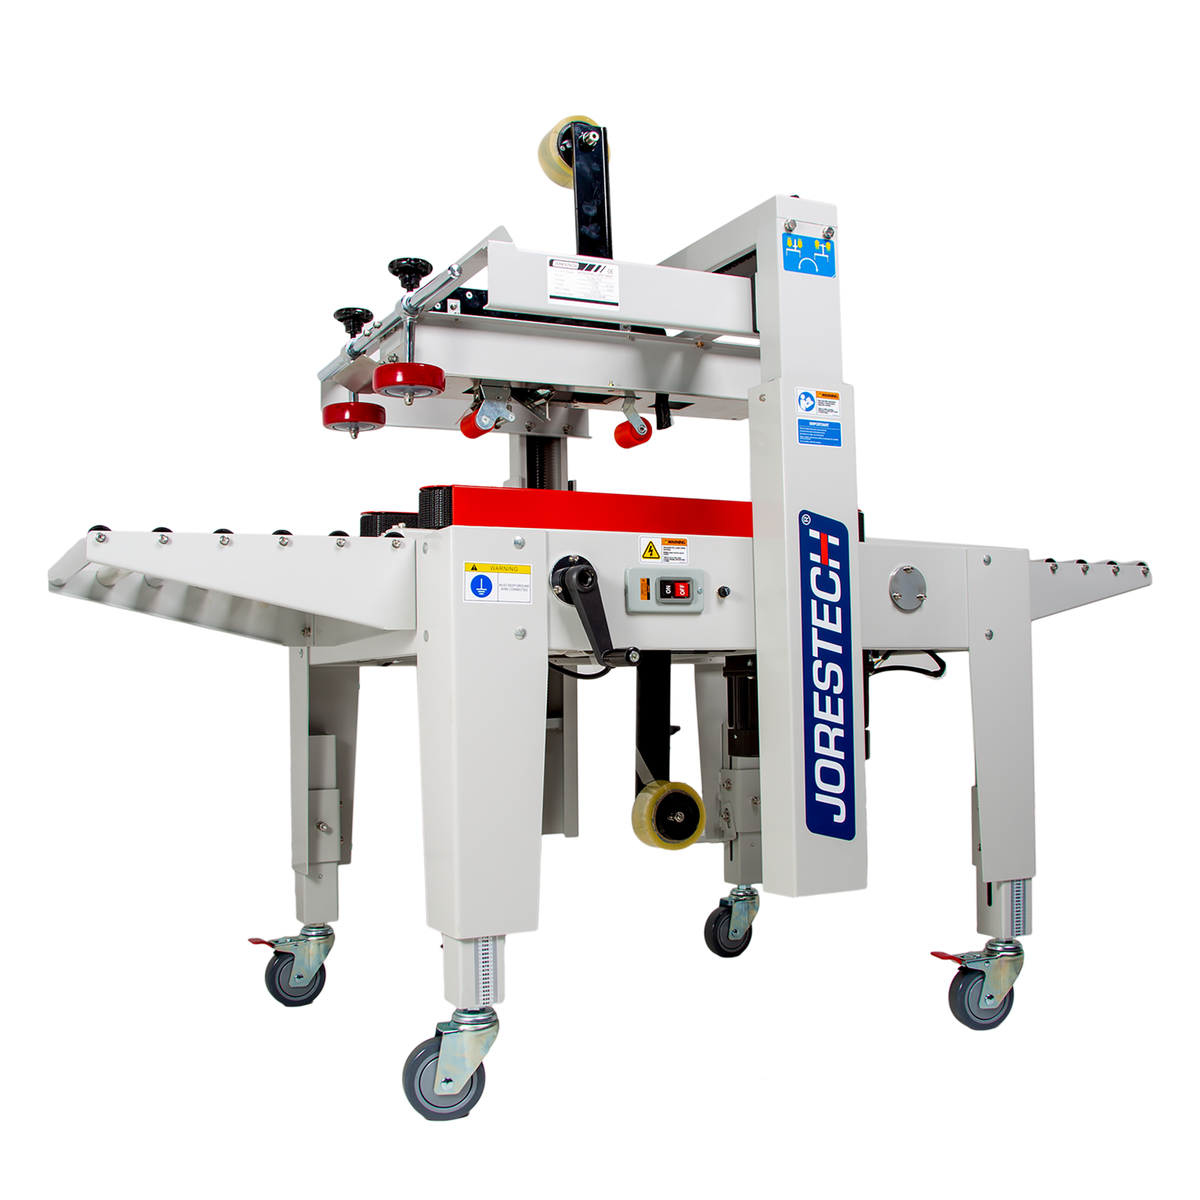 Machine to Tape Top of Bag in by JORES Technologies by JORES Technologies